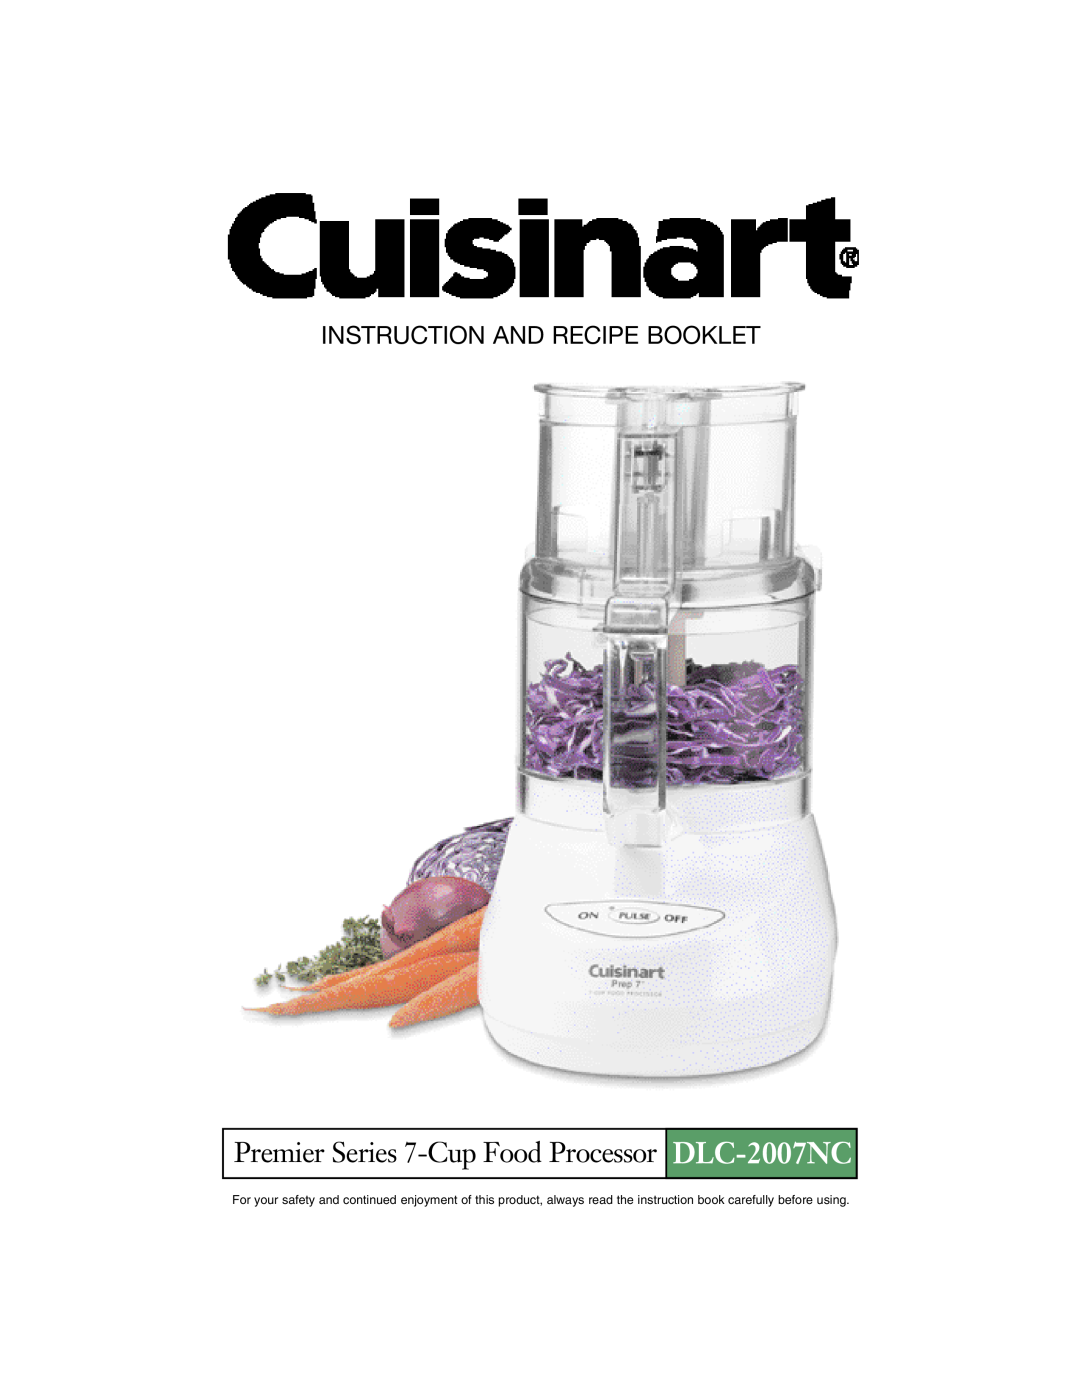 Cuisinart DLC-2007NC manual Premier Series 7-Cup Food Processor, Instruction And Recipe Booklet 